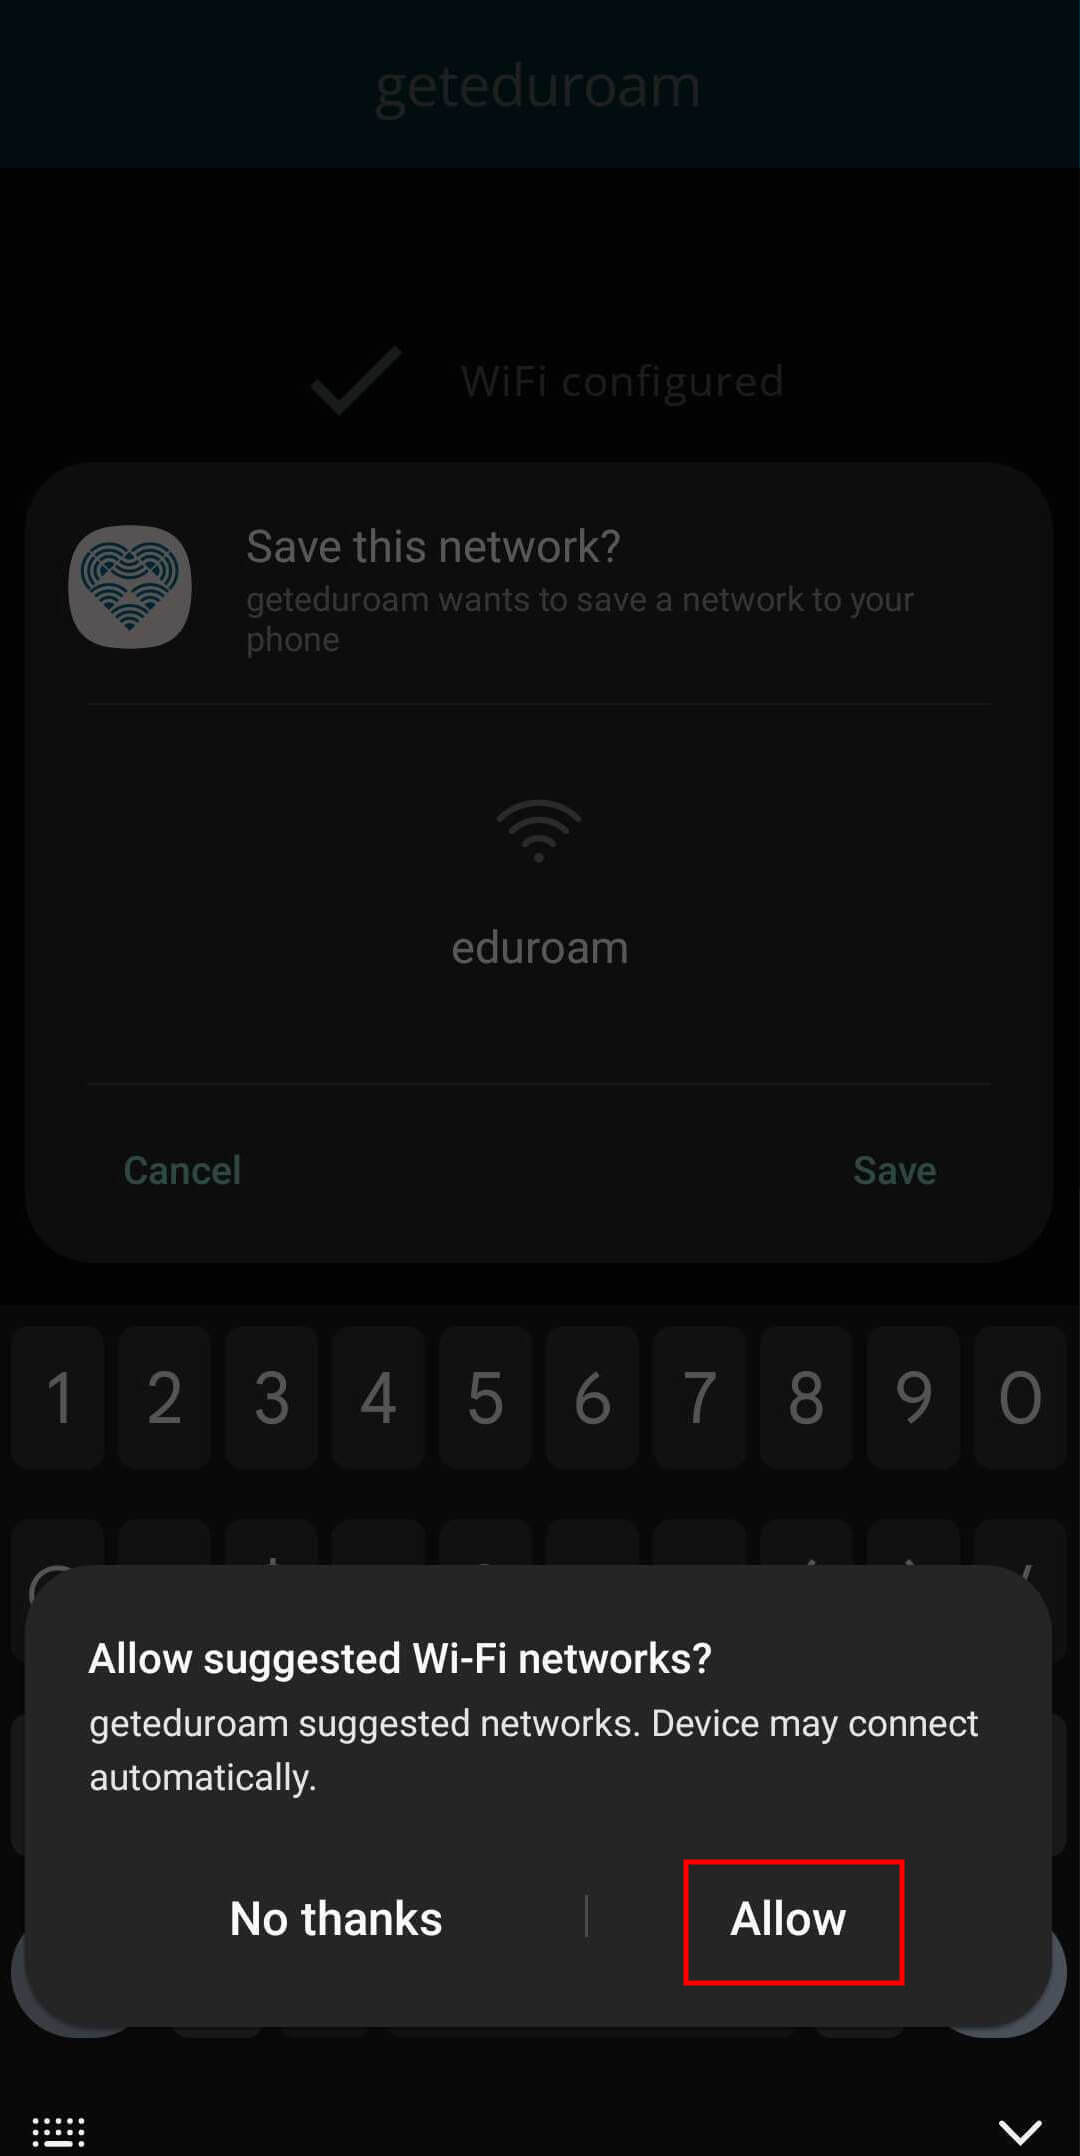 A text box popup asking to allow suggested wi-fi networks. There are two button options titled 'No thanks' and 'Allow,' with 'Allow' highlighted on the right.